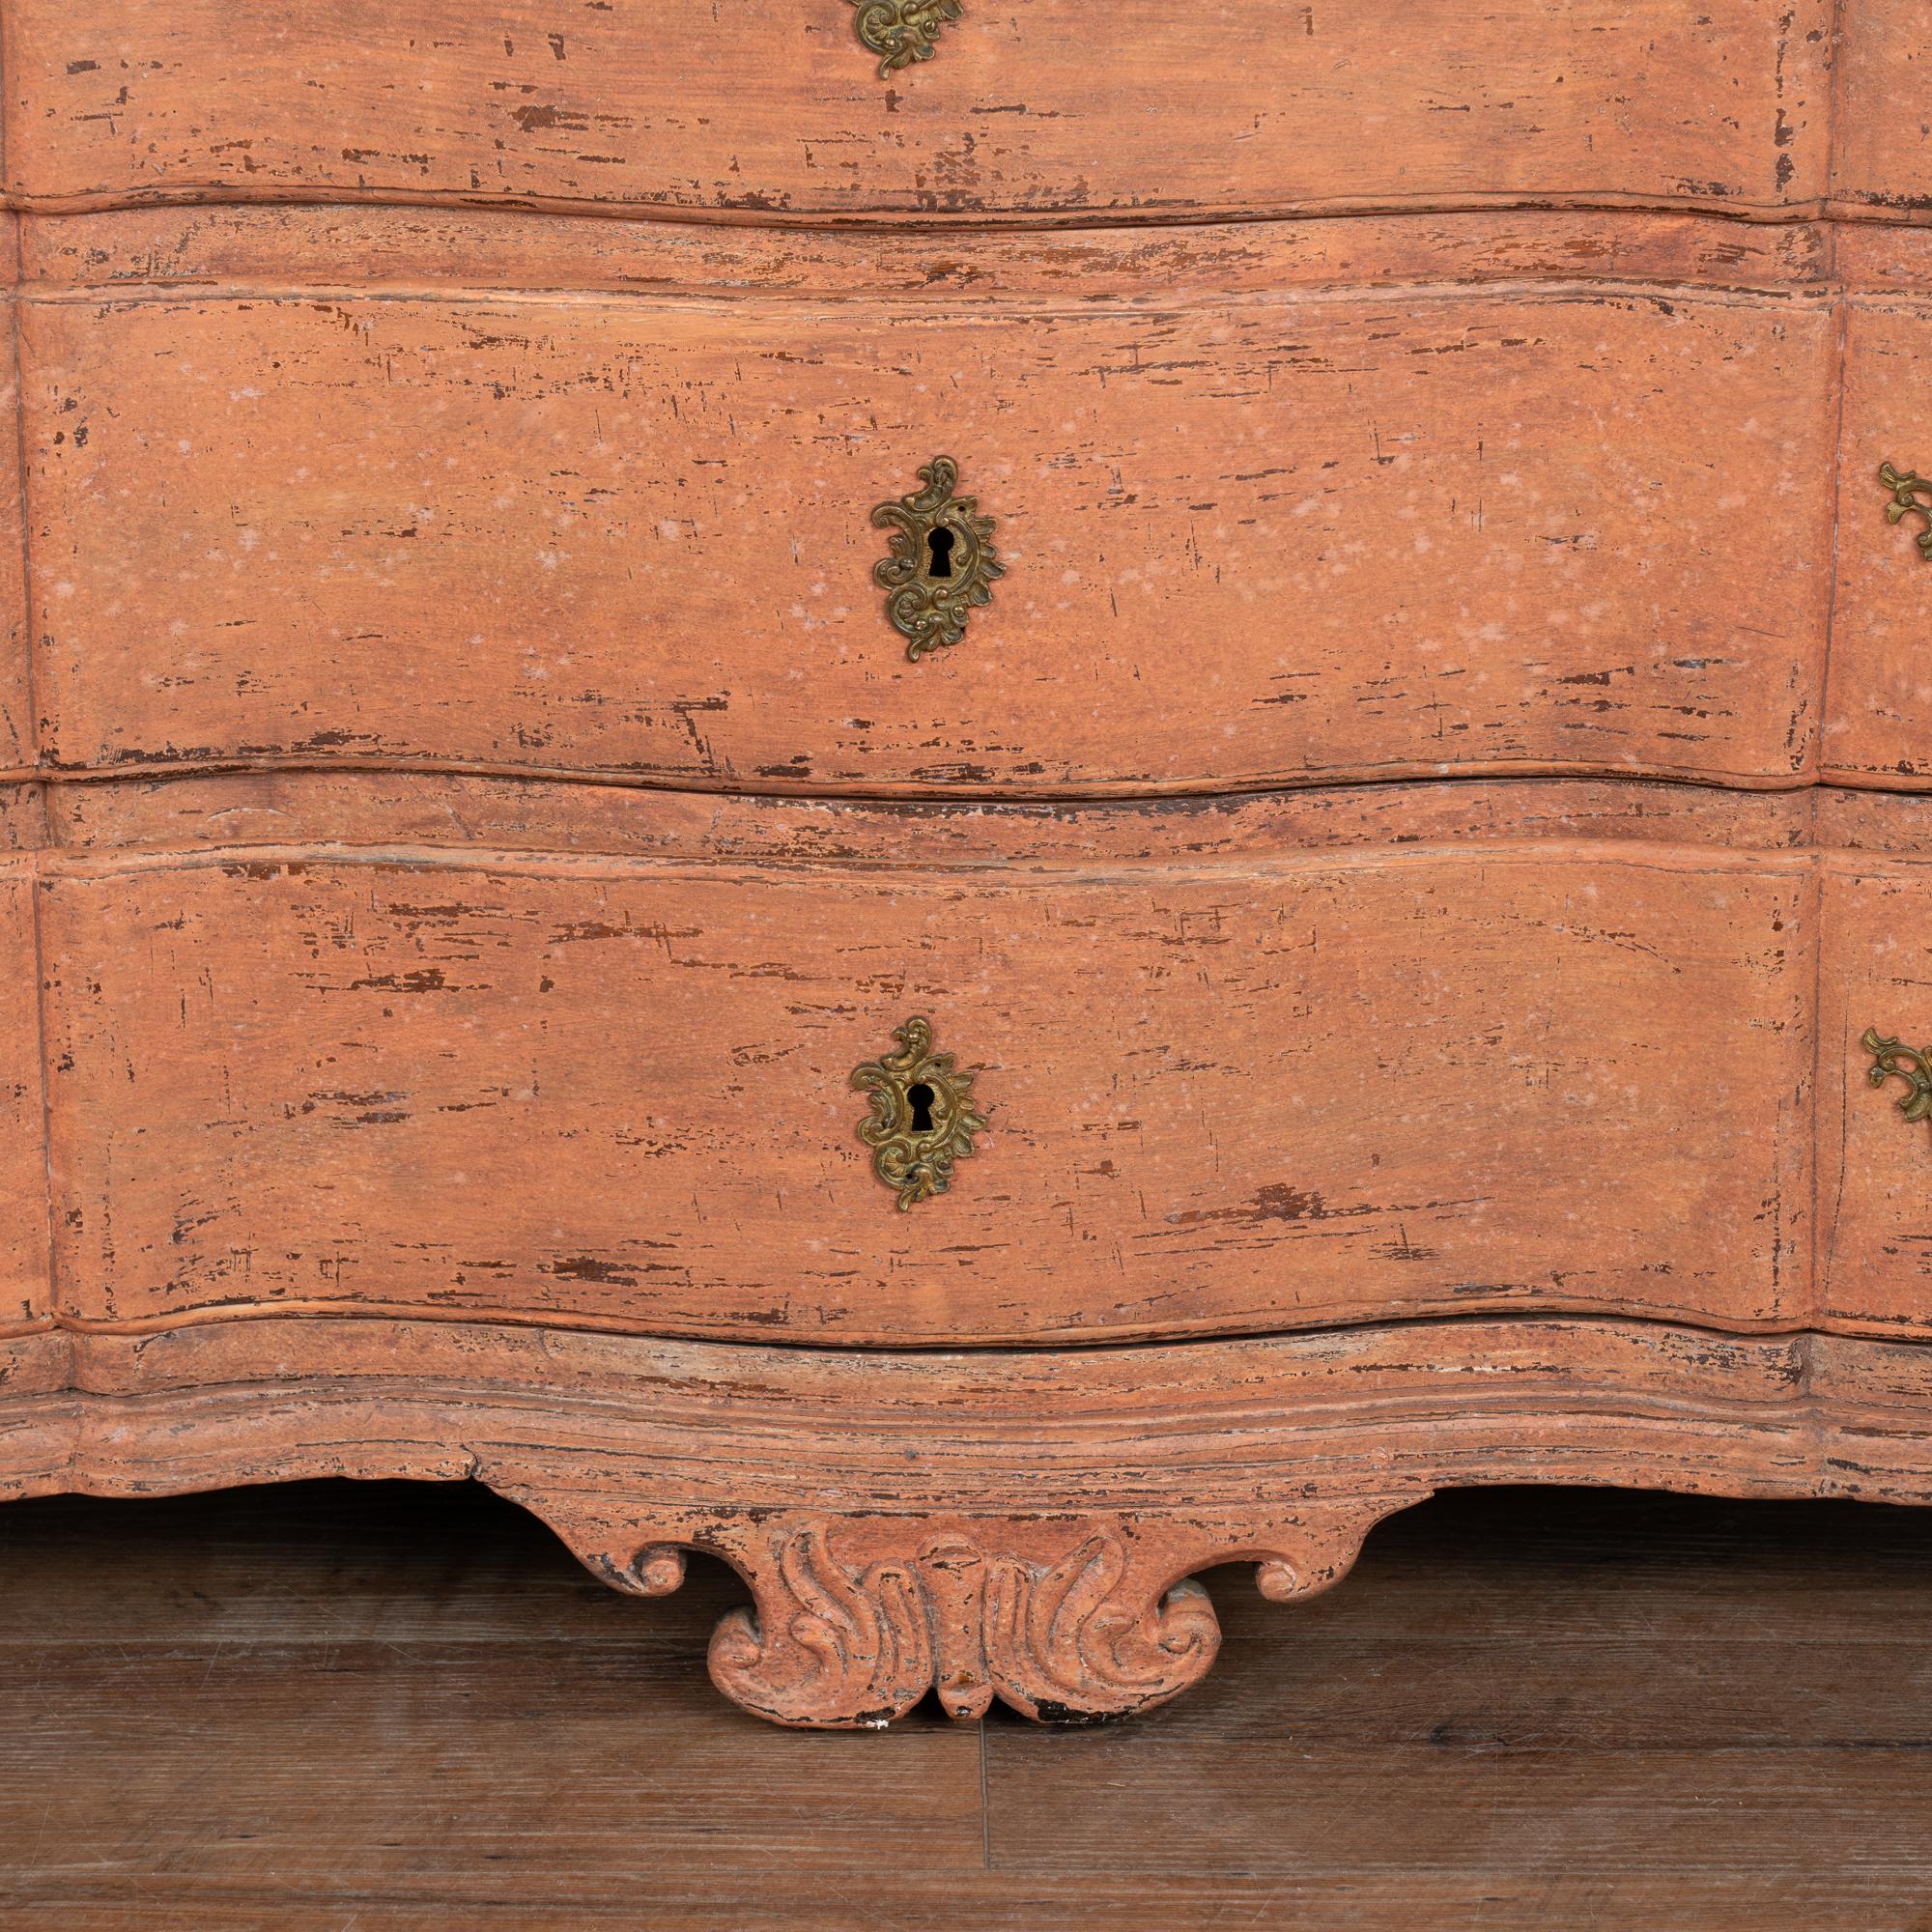 Oak Secretary Bureau With Painted Finish from Sweden circa 1760-1800 For Sale 6